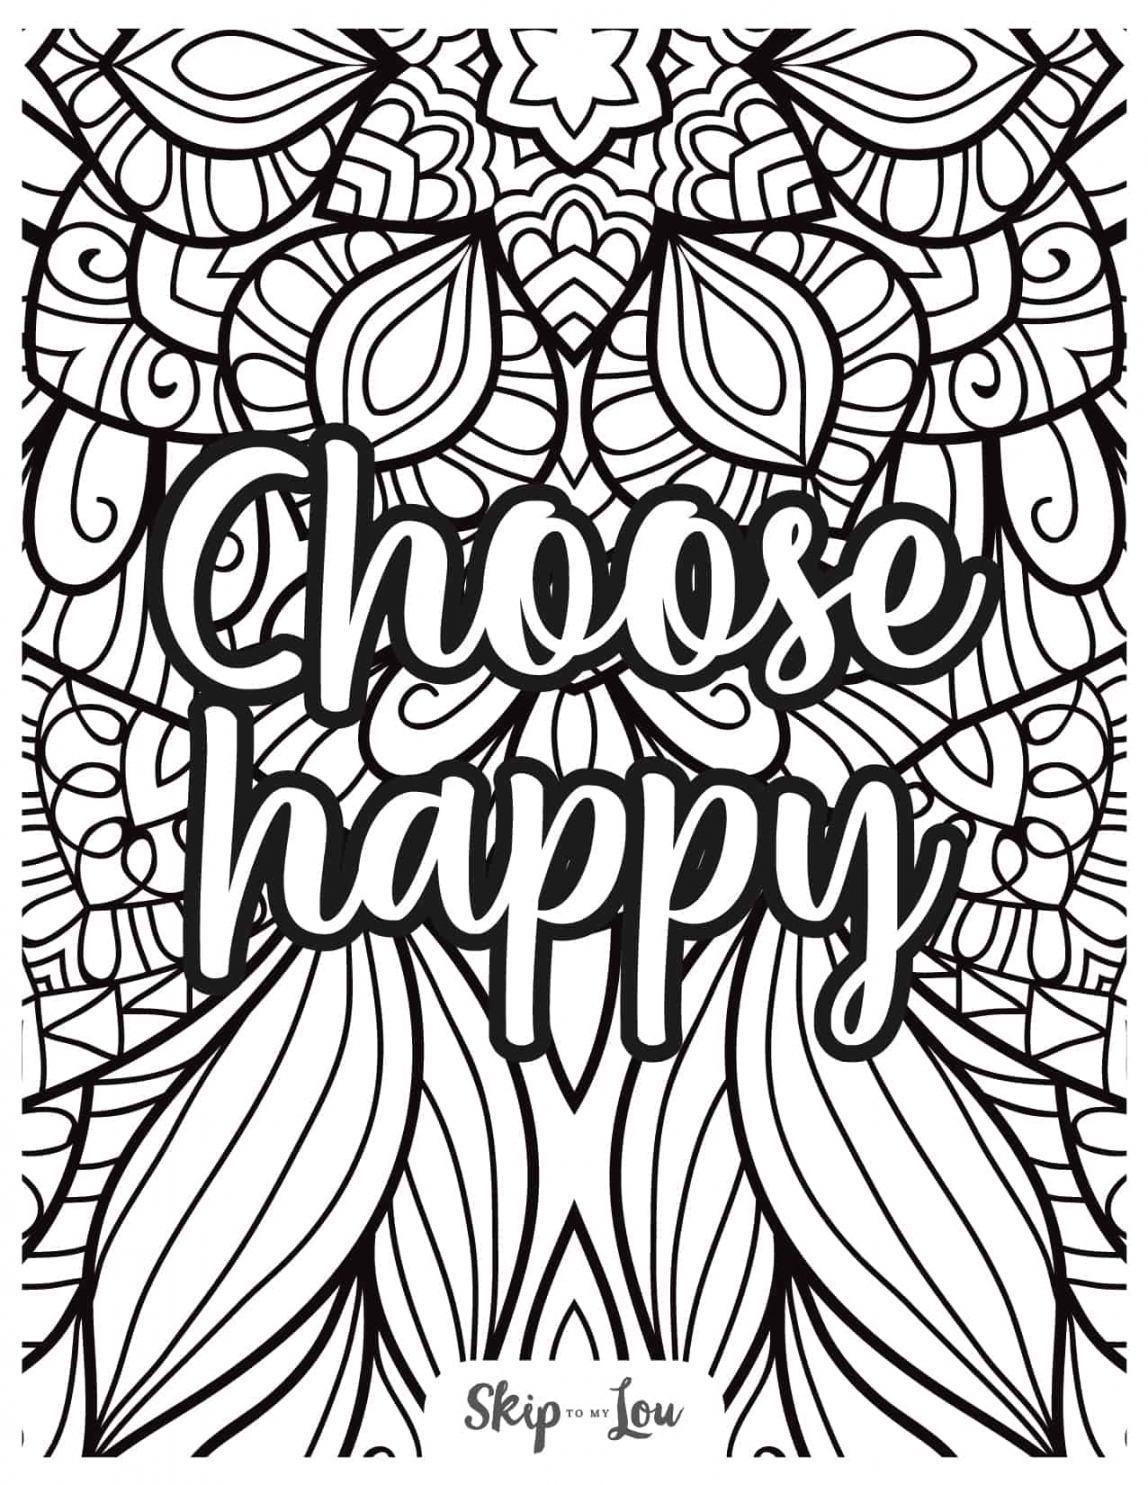 Coloring Sheets Printable Free - Printable - Free Coloring Pages For Adults  Skip To My Lou